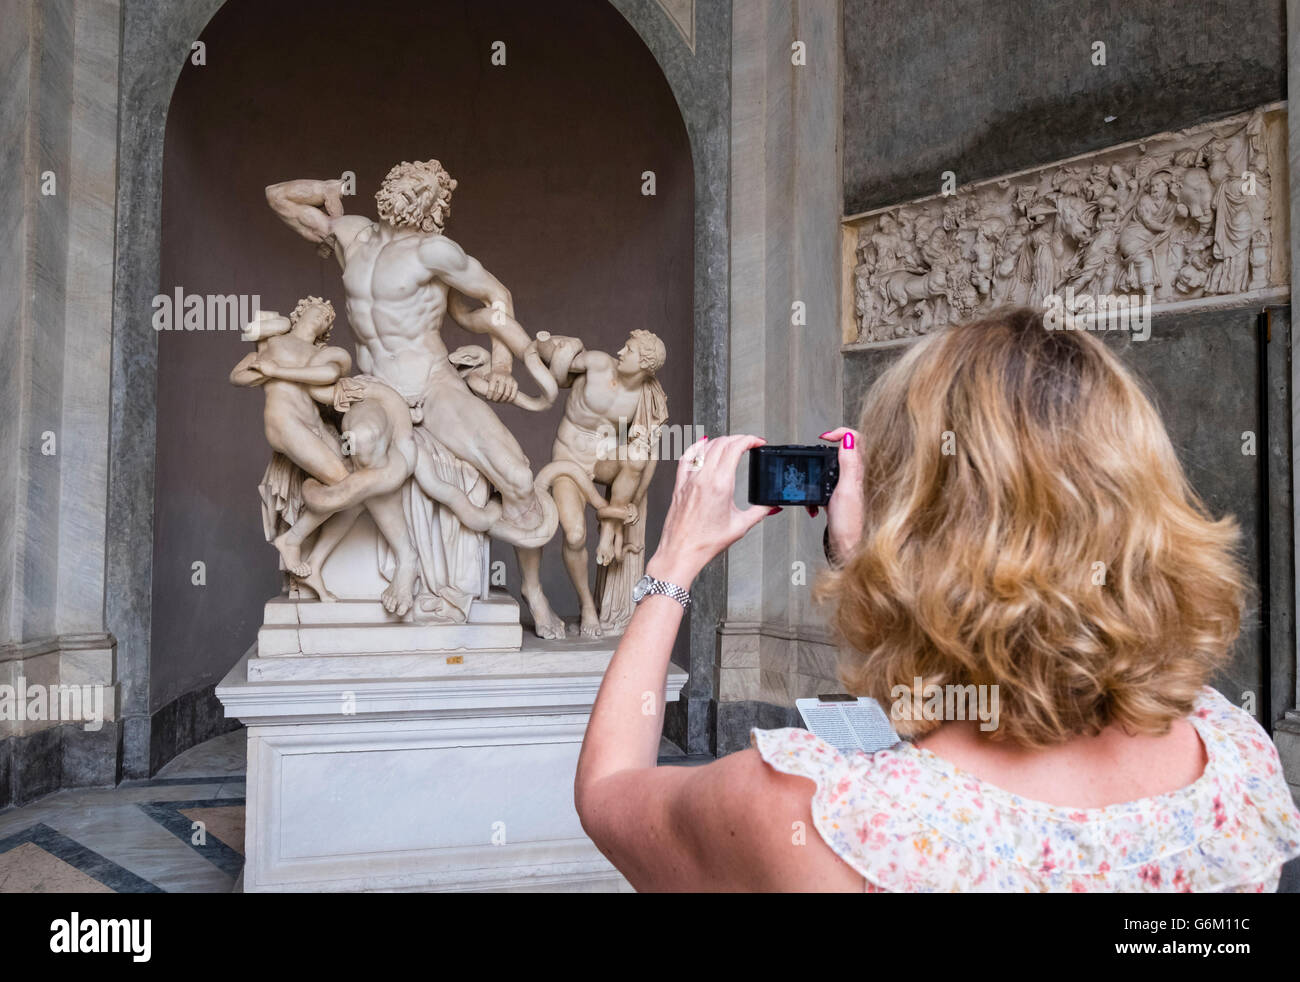 Tourist looking at The Laocošn group sculpture at the Vatican Museum in Rome, Italy Stock Photo